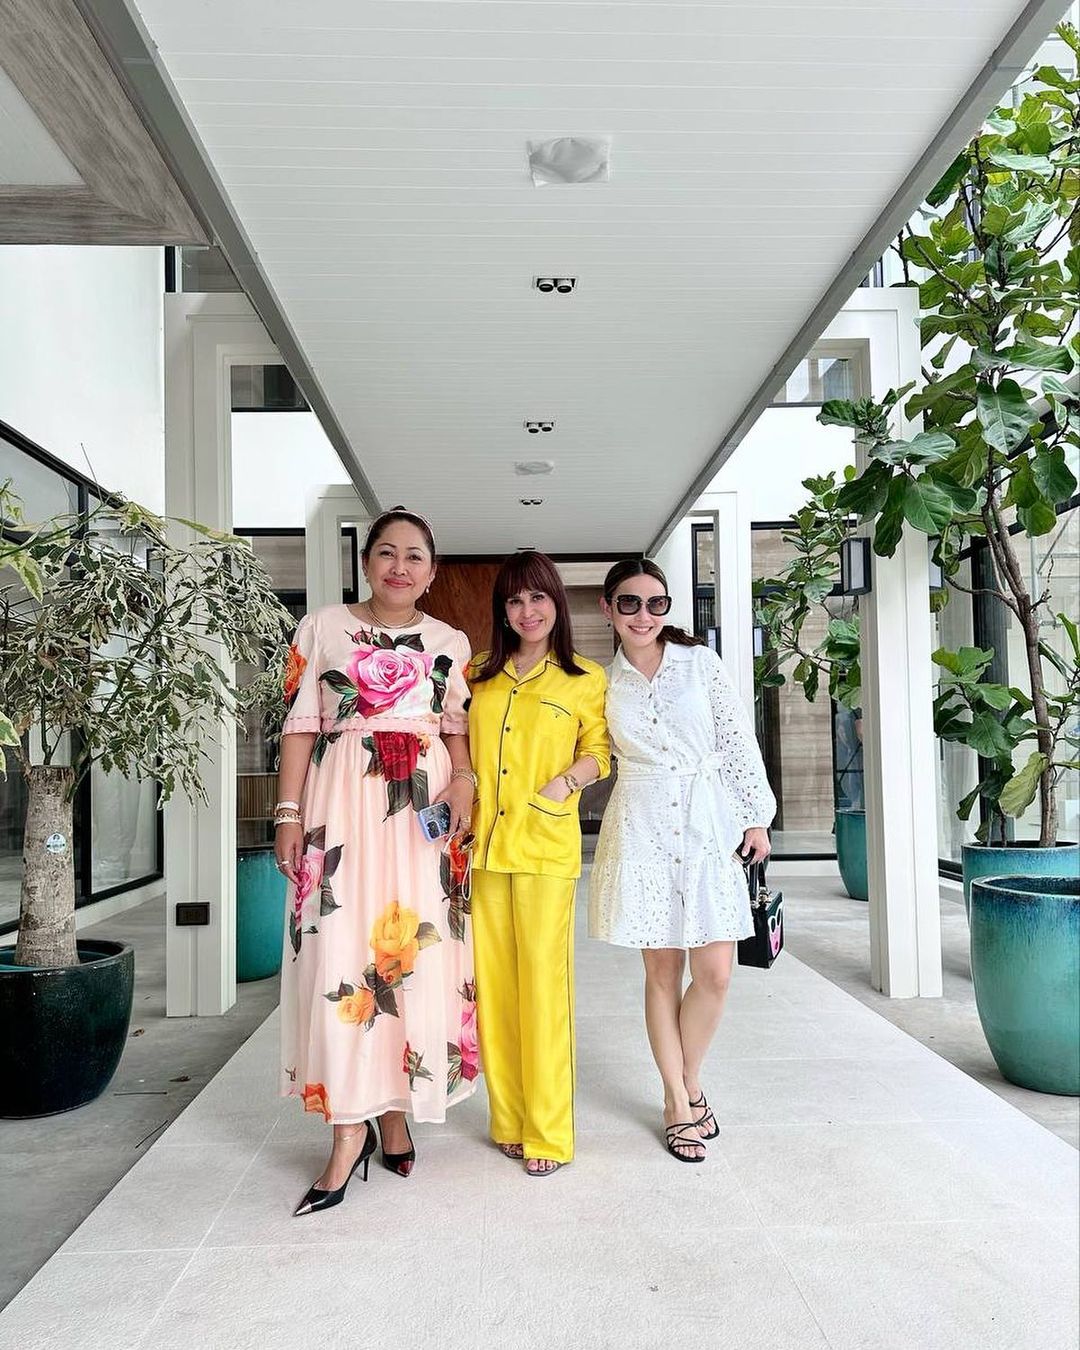 Look: Jinkee Pacquiao Attends Brunch With Manny Pacquiao And